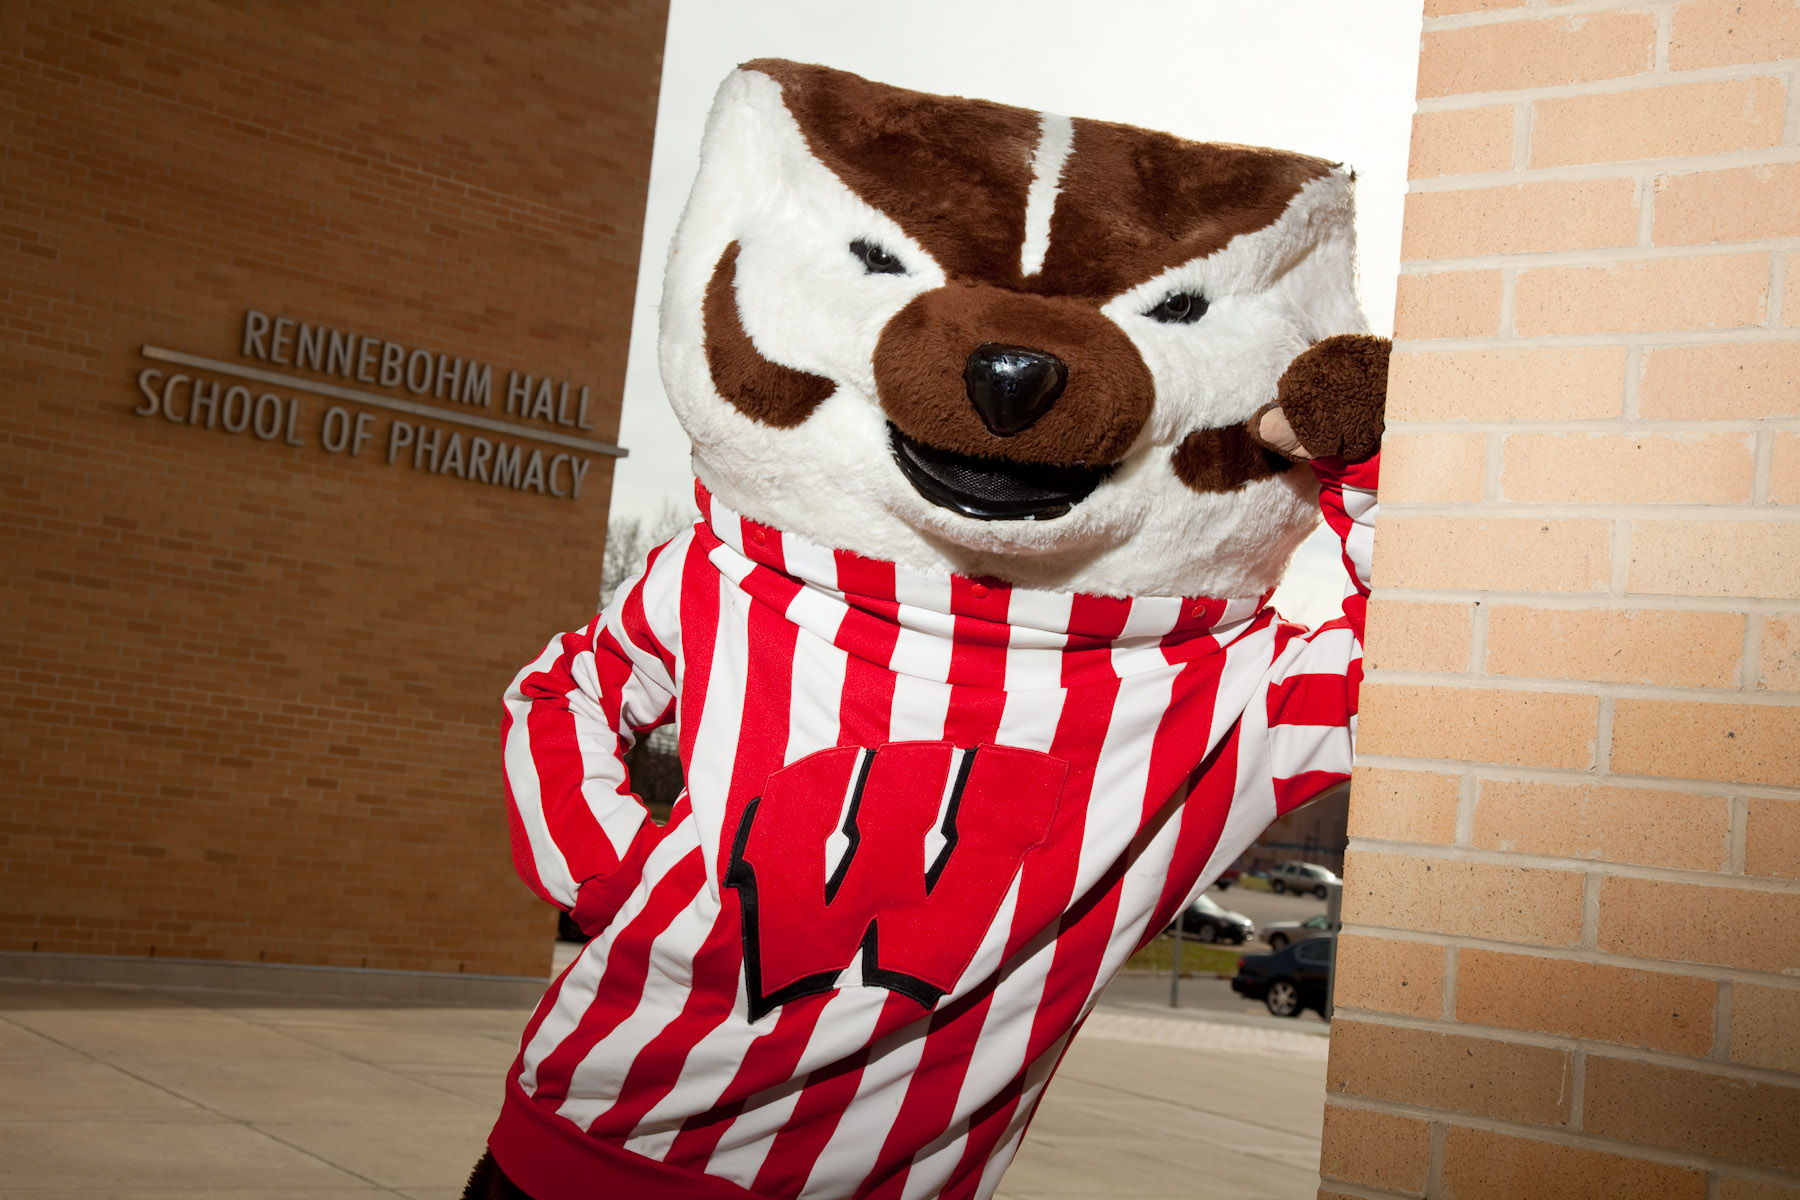 Bucky Badger poses in front of Rennebohm Hall, the School of Pharmacy building